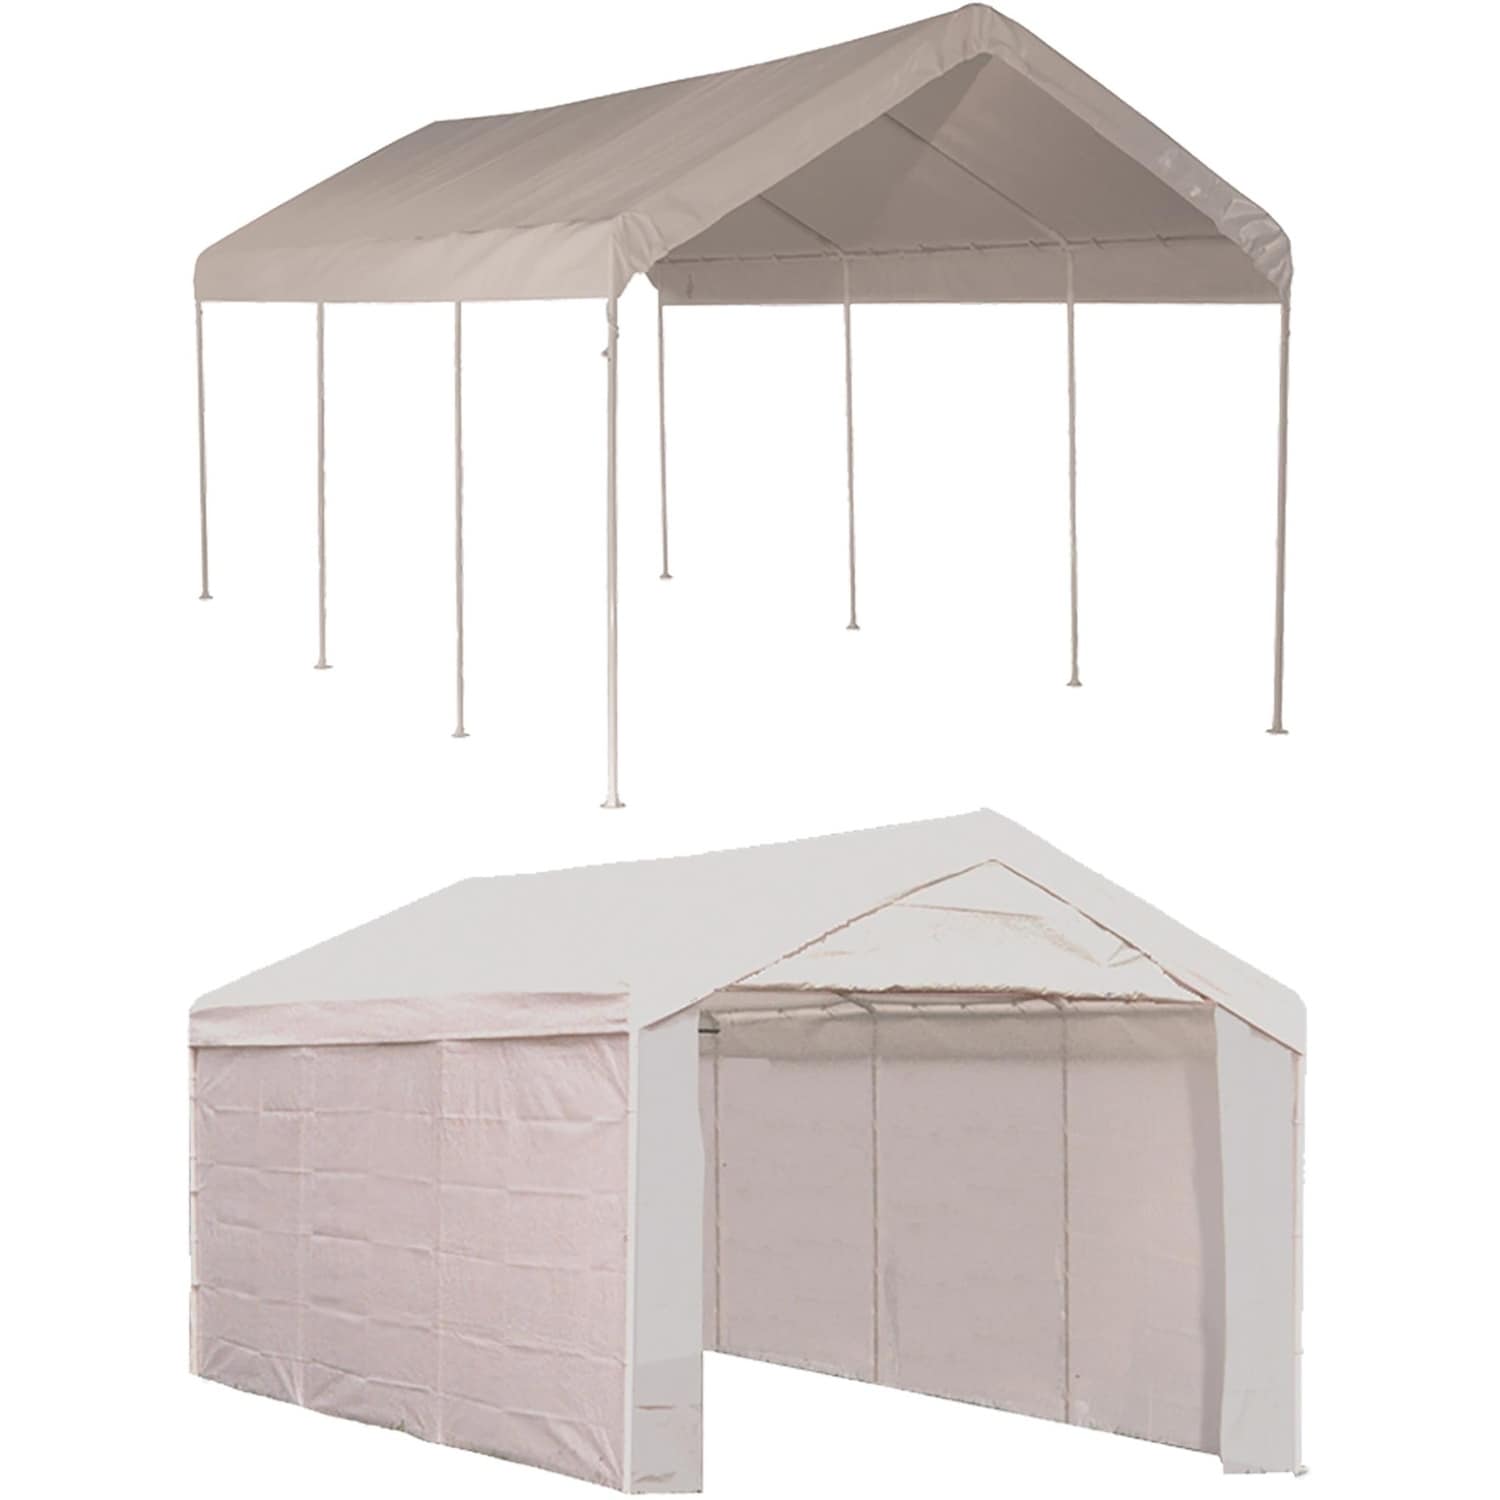 Shelterlogic Max Ap Canopy Series 10 X 20 2 in 1 Canopy Pack